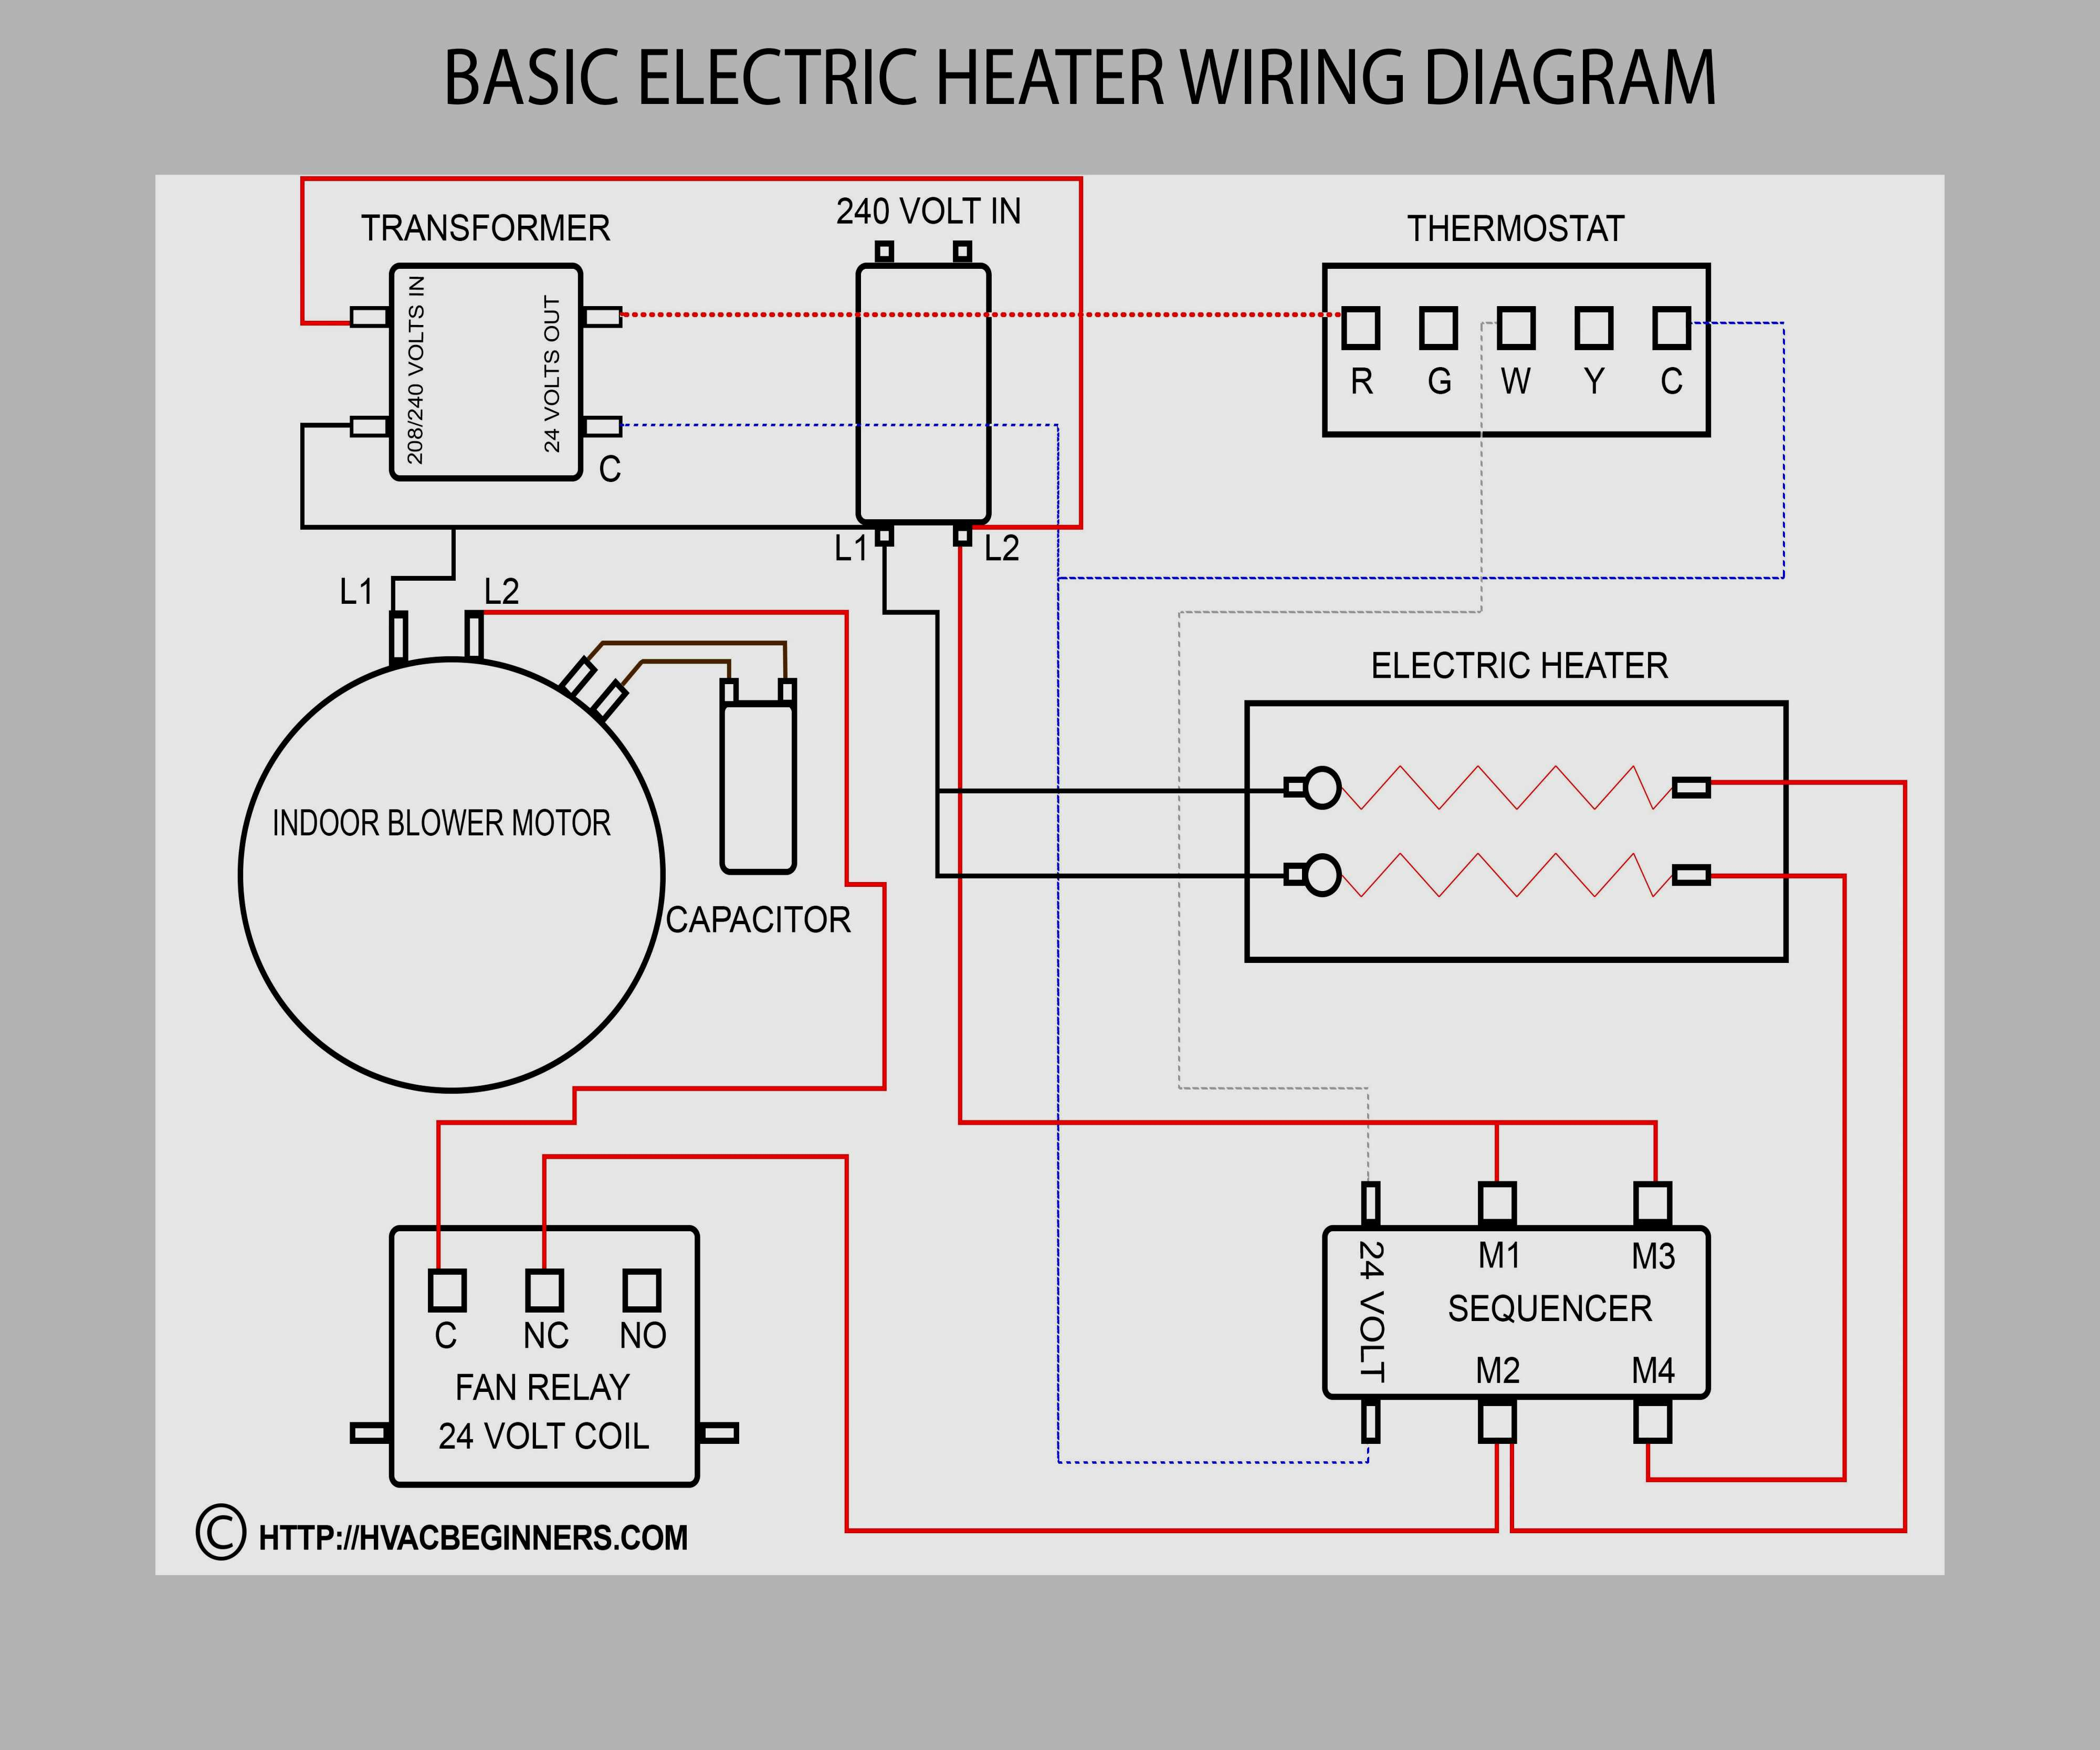 Carrier Air Conditioner Wiring Diagram - Trusted Wiring Diagram - Carrier Air Conditioner Wiring Diagram